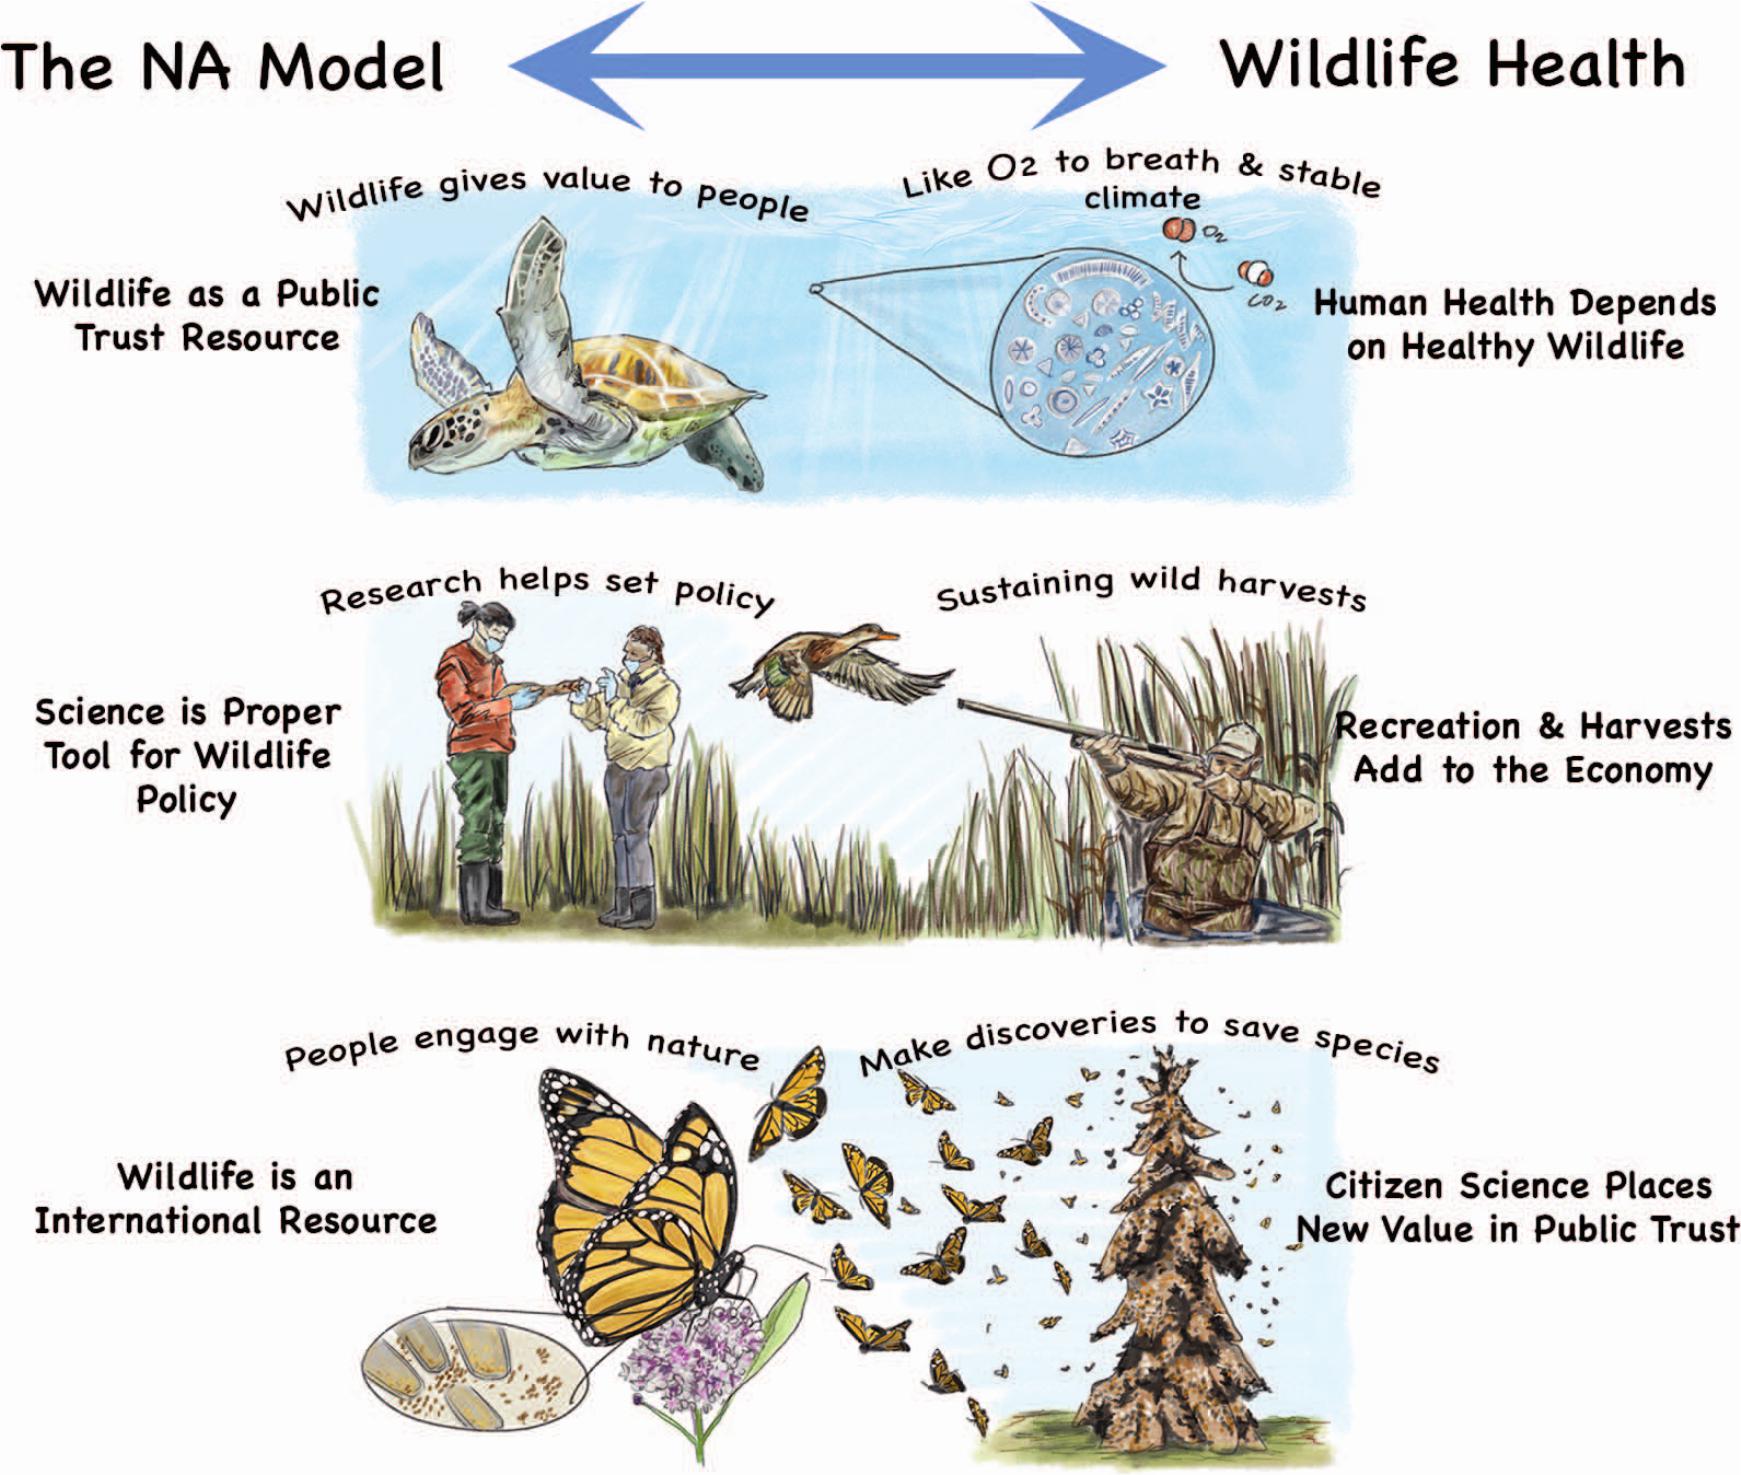 wildlife health and conservation infographic